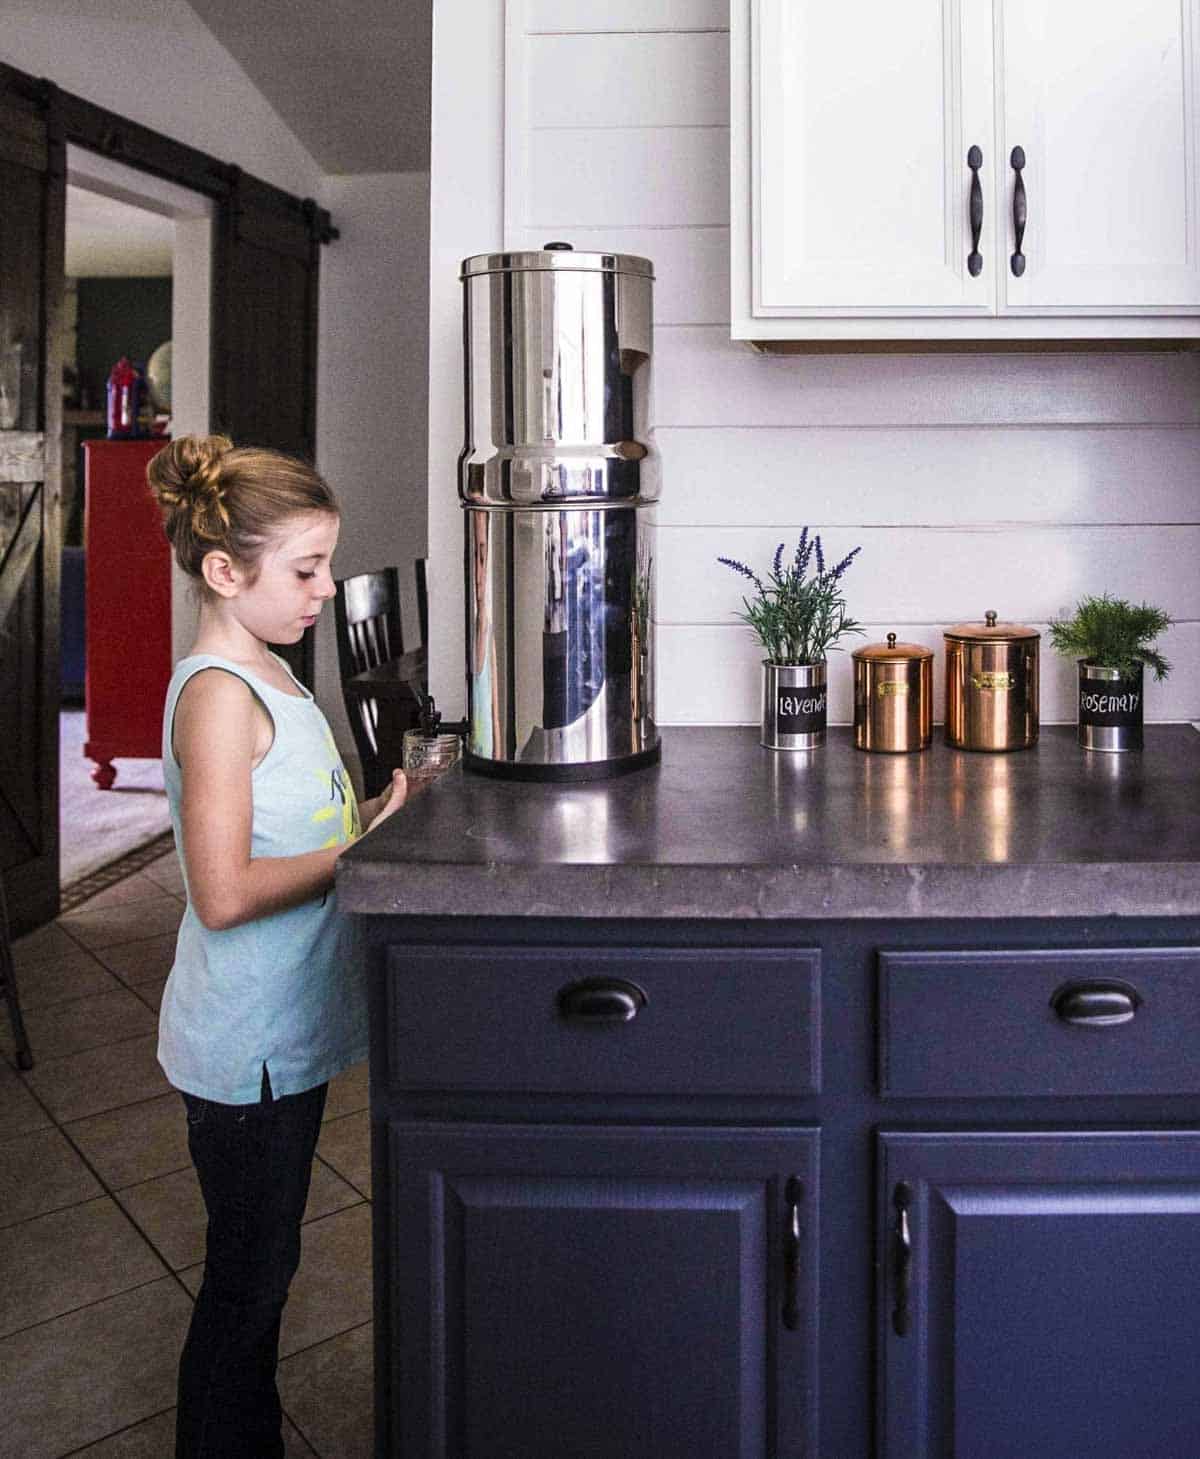 My daughter using our Berkey water filter system in the kitchen